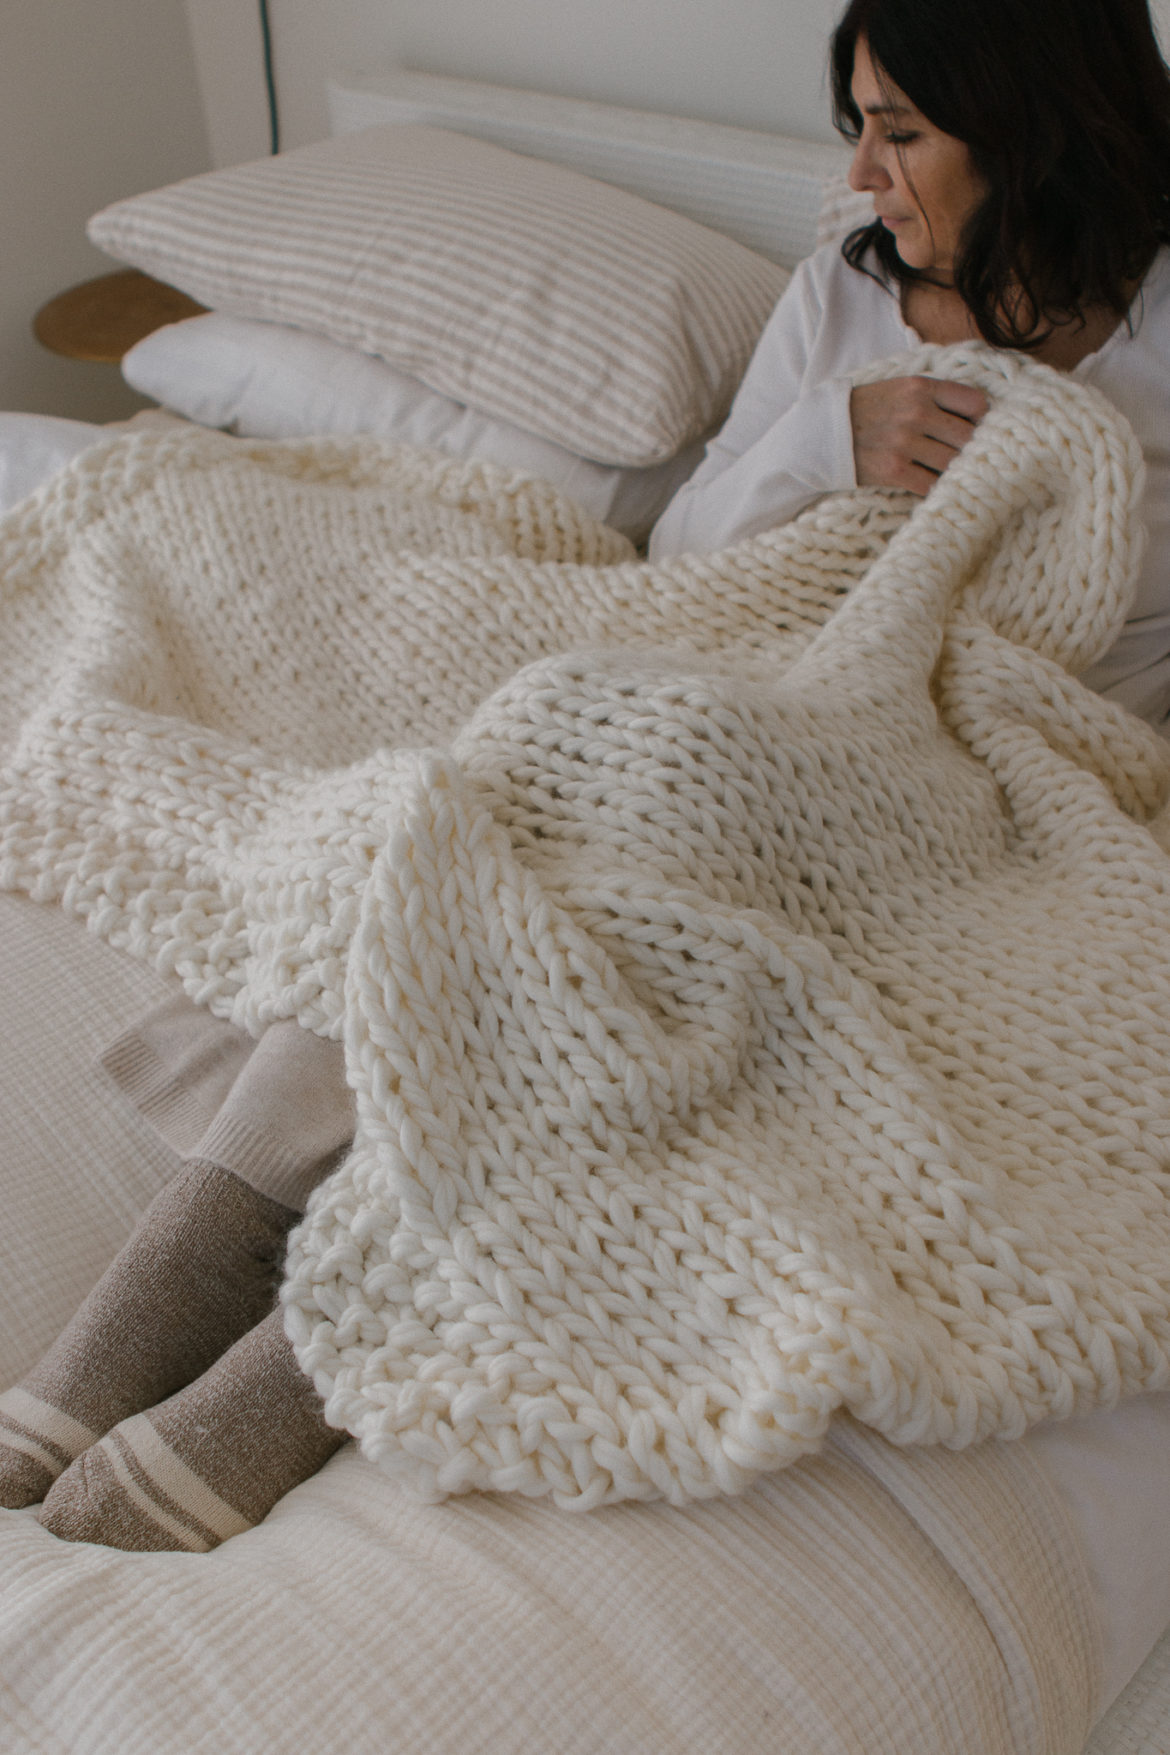 Free blanket pattern : How to knit a chunky knit blanket. Everything you need to know to knit a chunky wool blanket. Wool, needles and pattern included in kit.